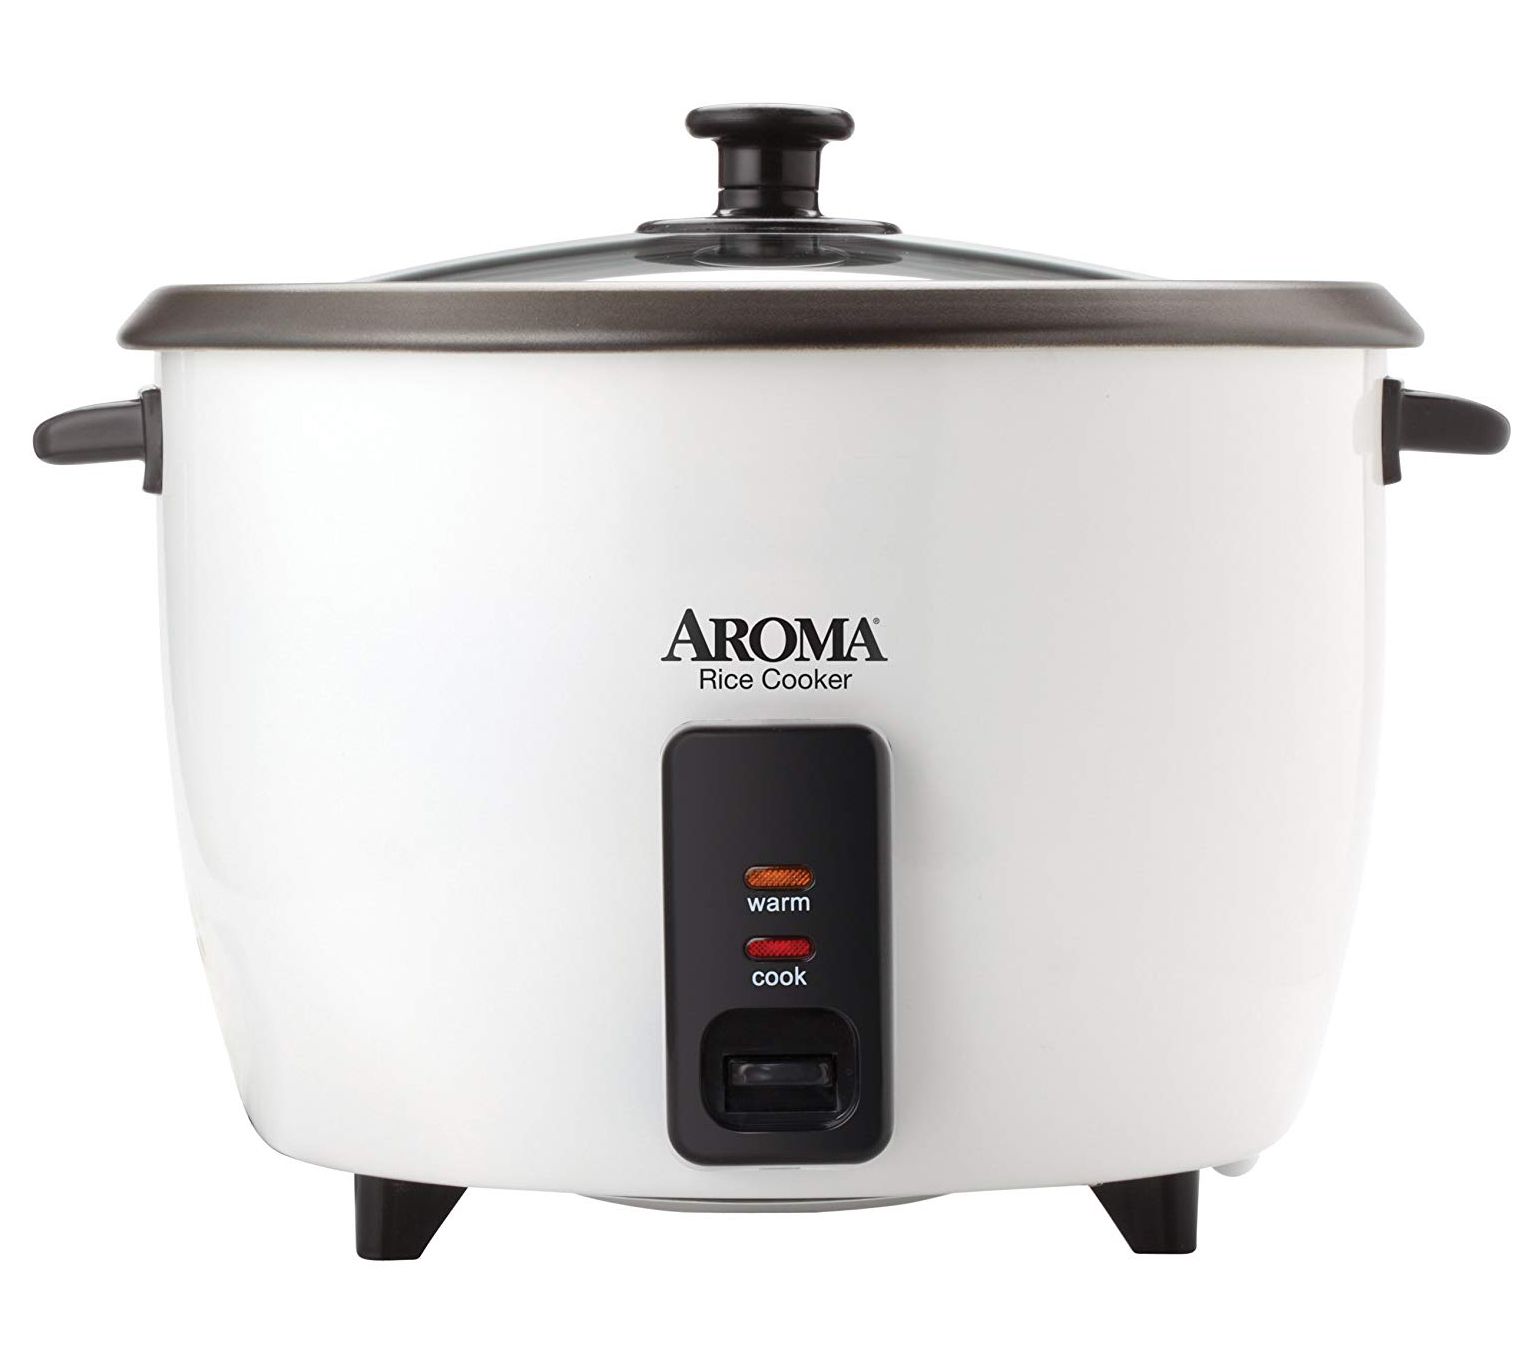 Aroma NutriWare Rice Cooker & Food Steamer 